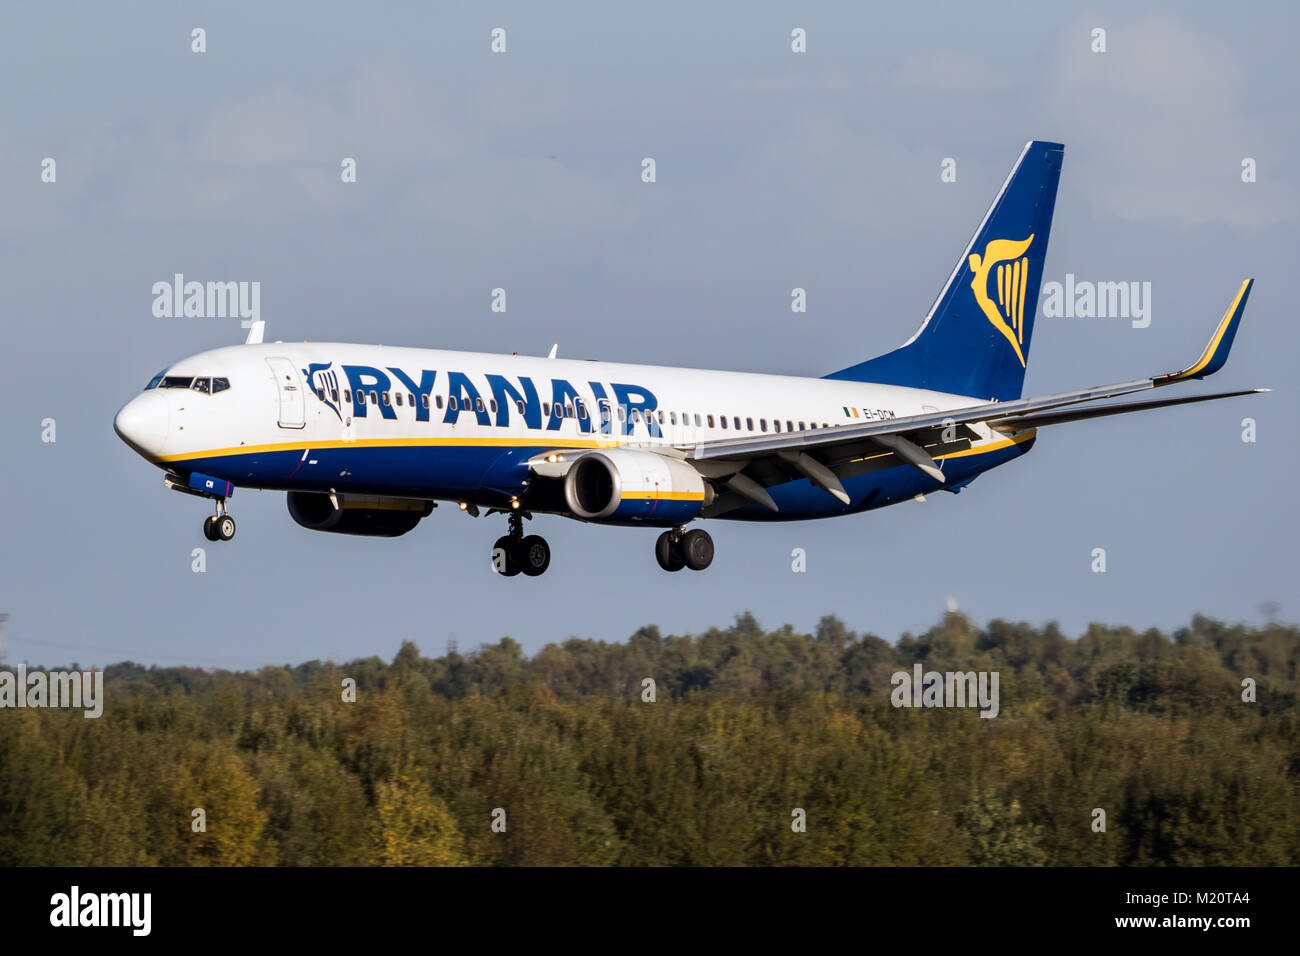 EINDHOVEN, THE NETHERLANDS - OCT 27, 2017: Boeing 737 airplane from Ryanair about to land on Eindhoven Airport. Stock Photo